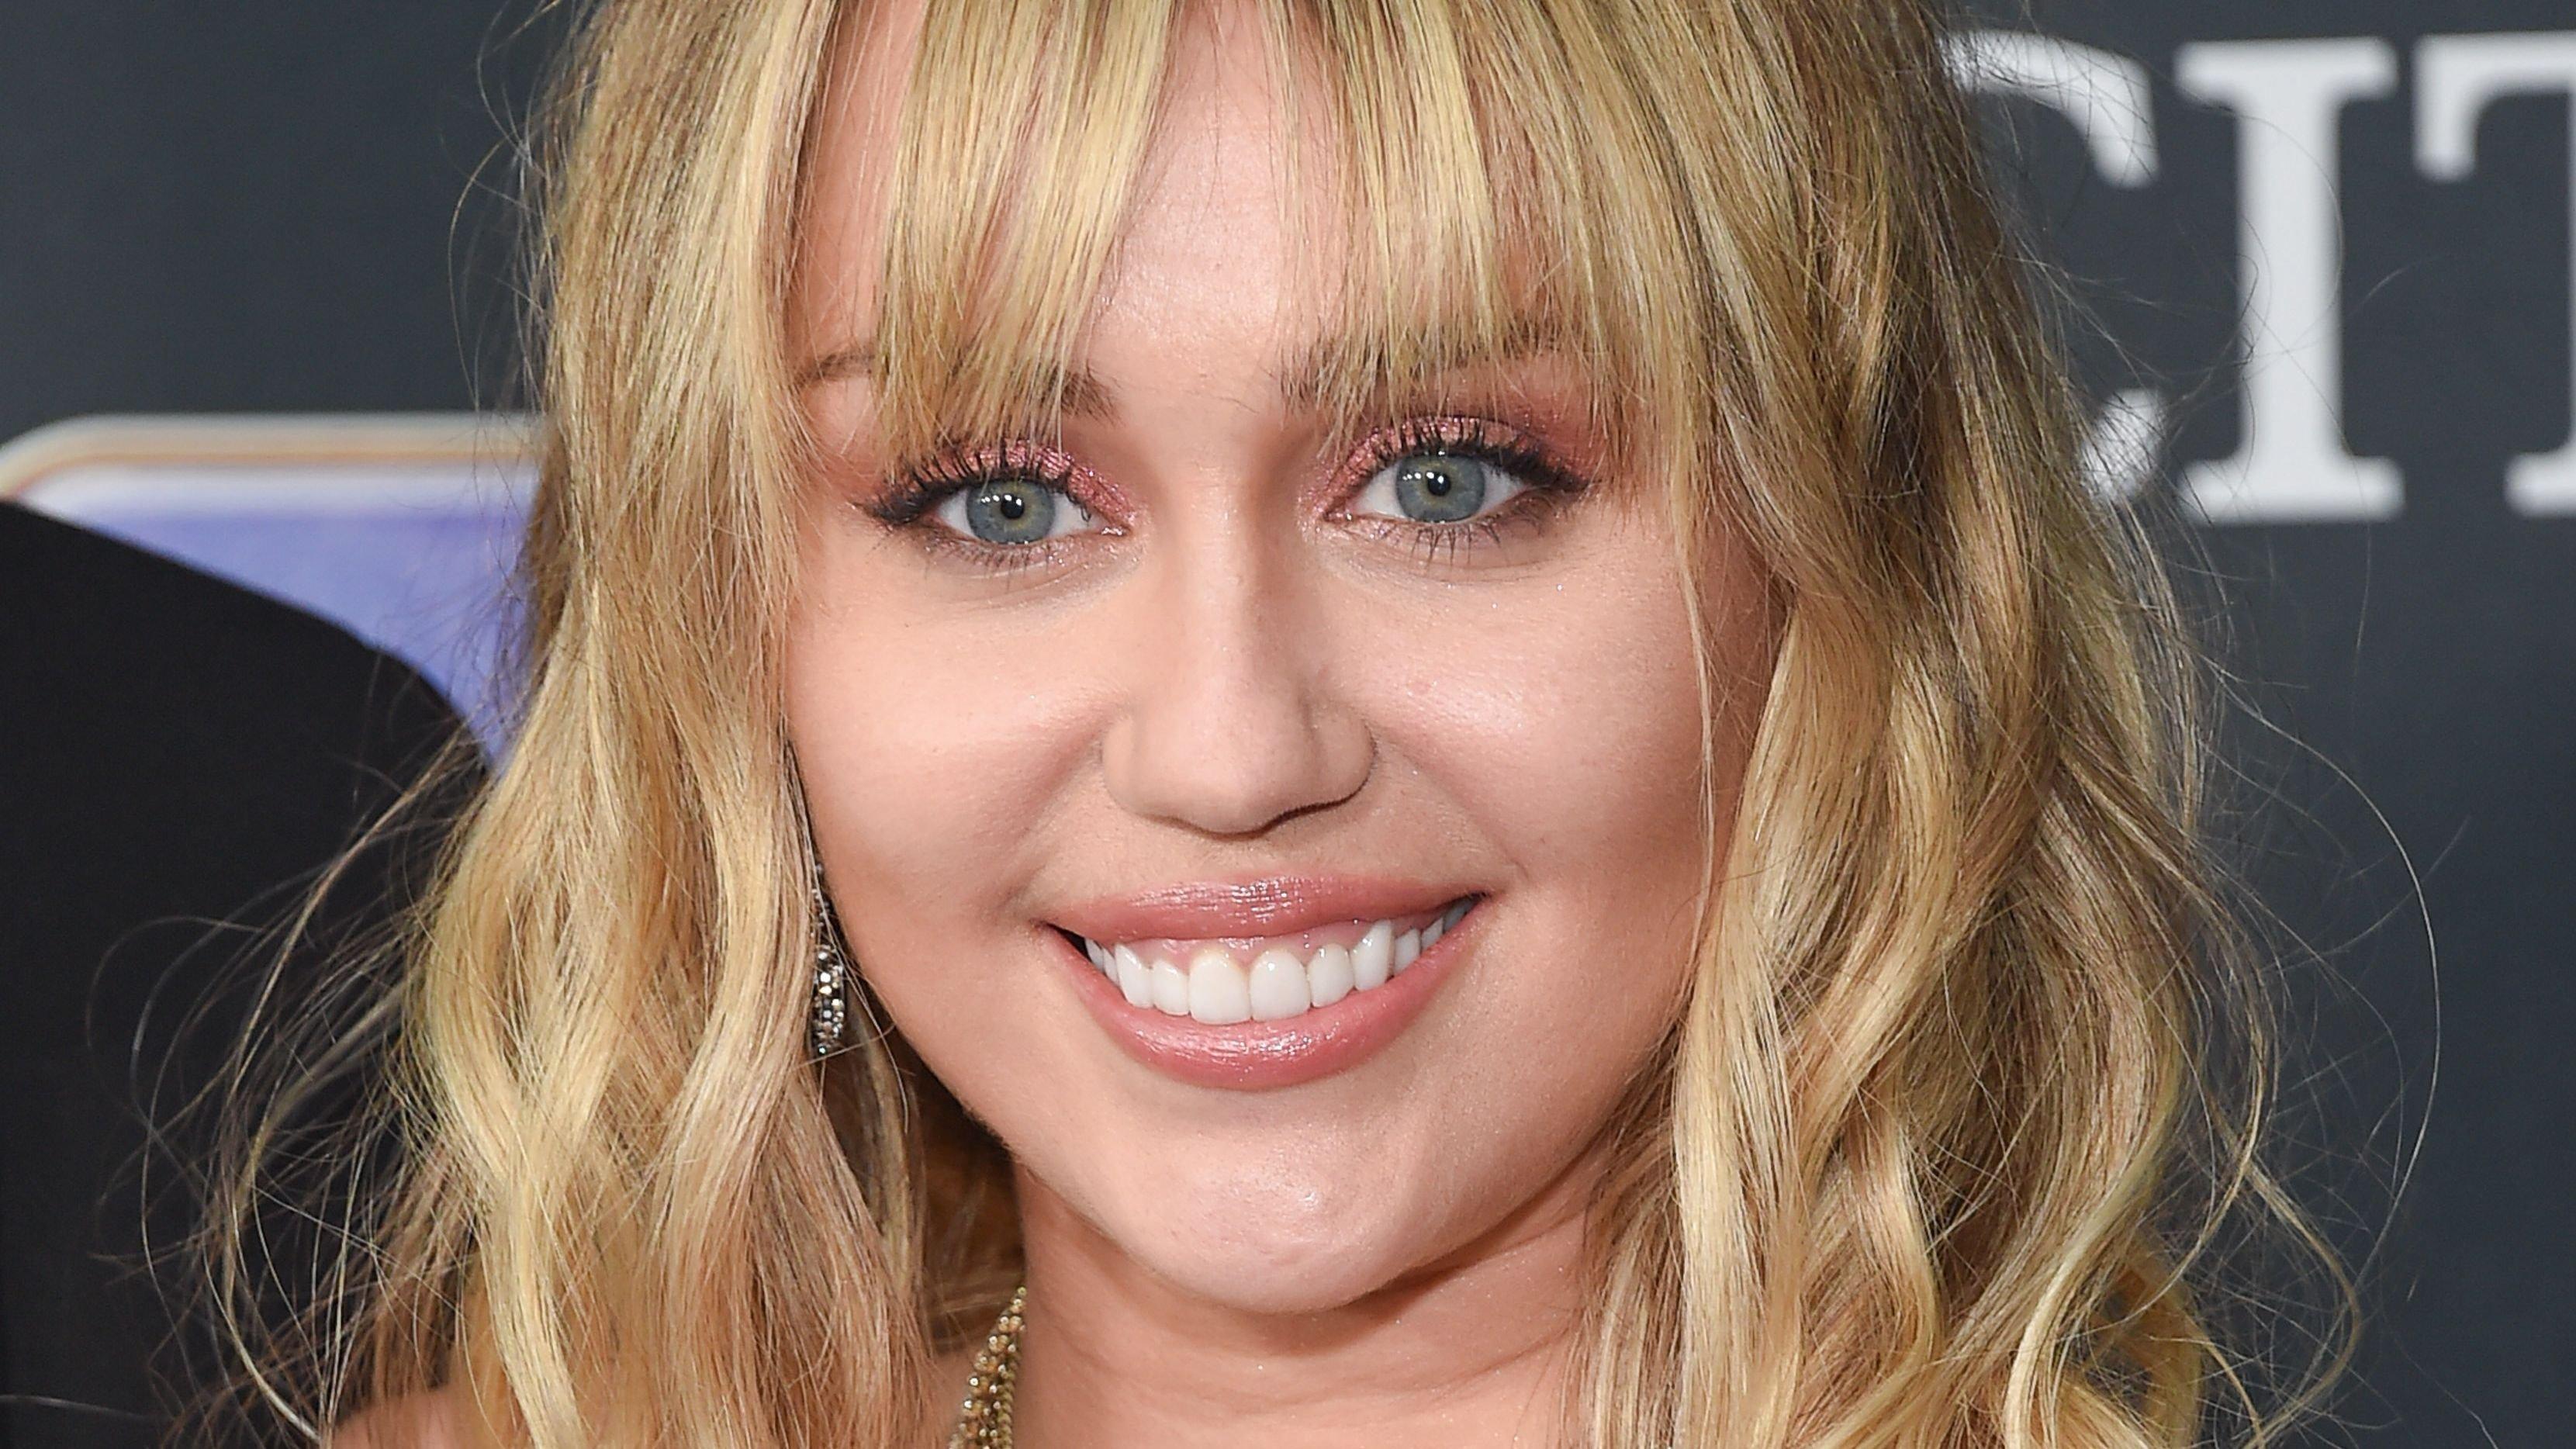 Miley Cyrus sporting bangs and smiling for a photograph.